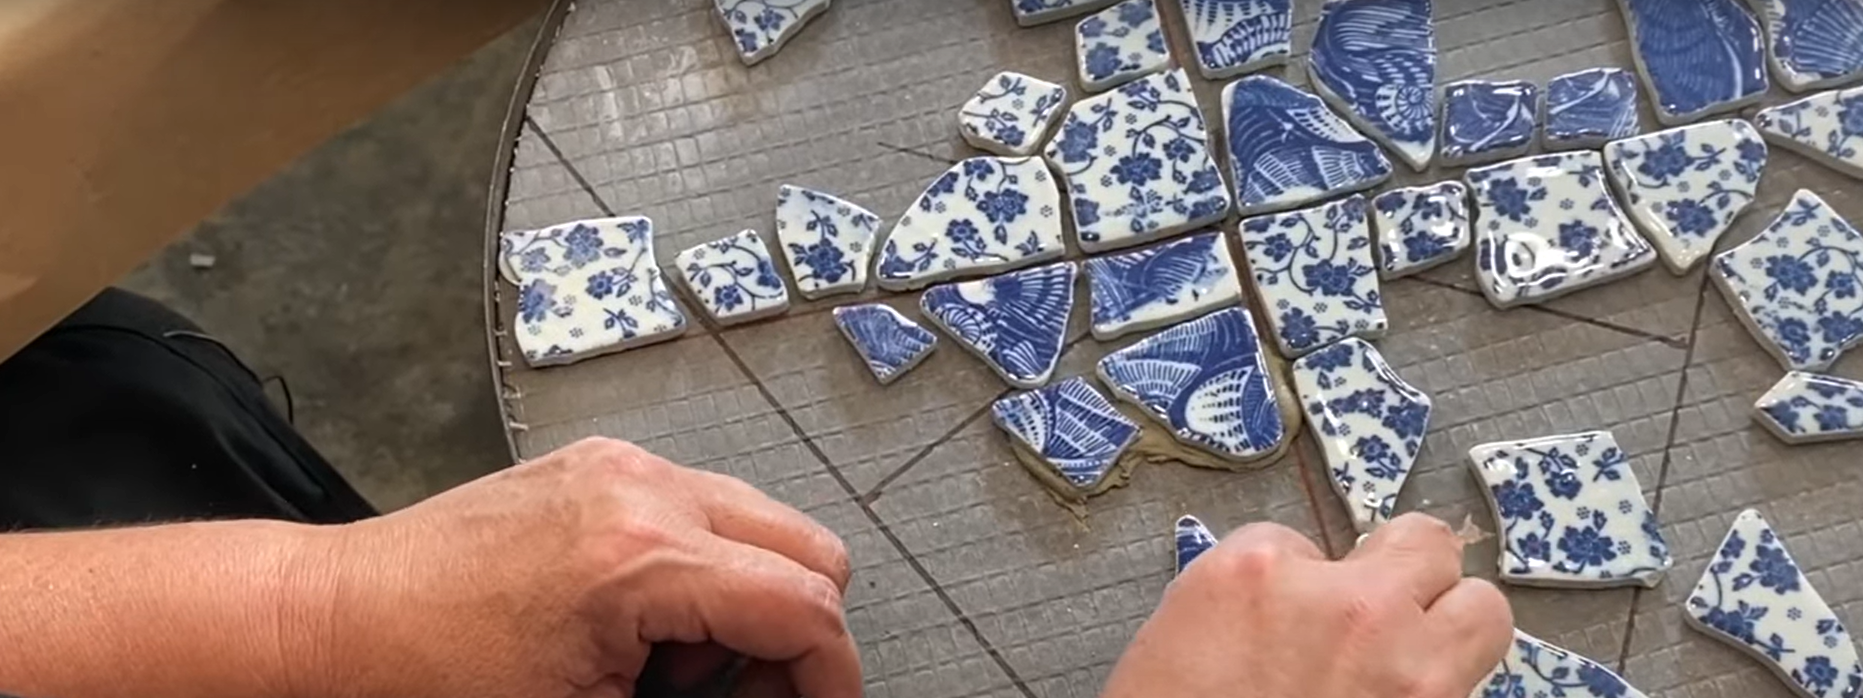 How to tile a tabletop